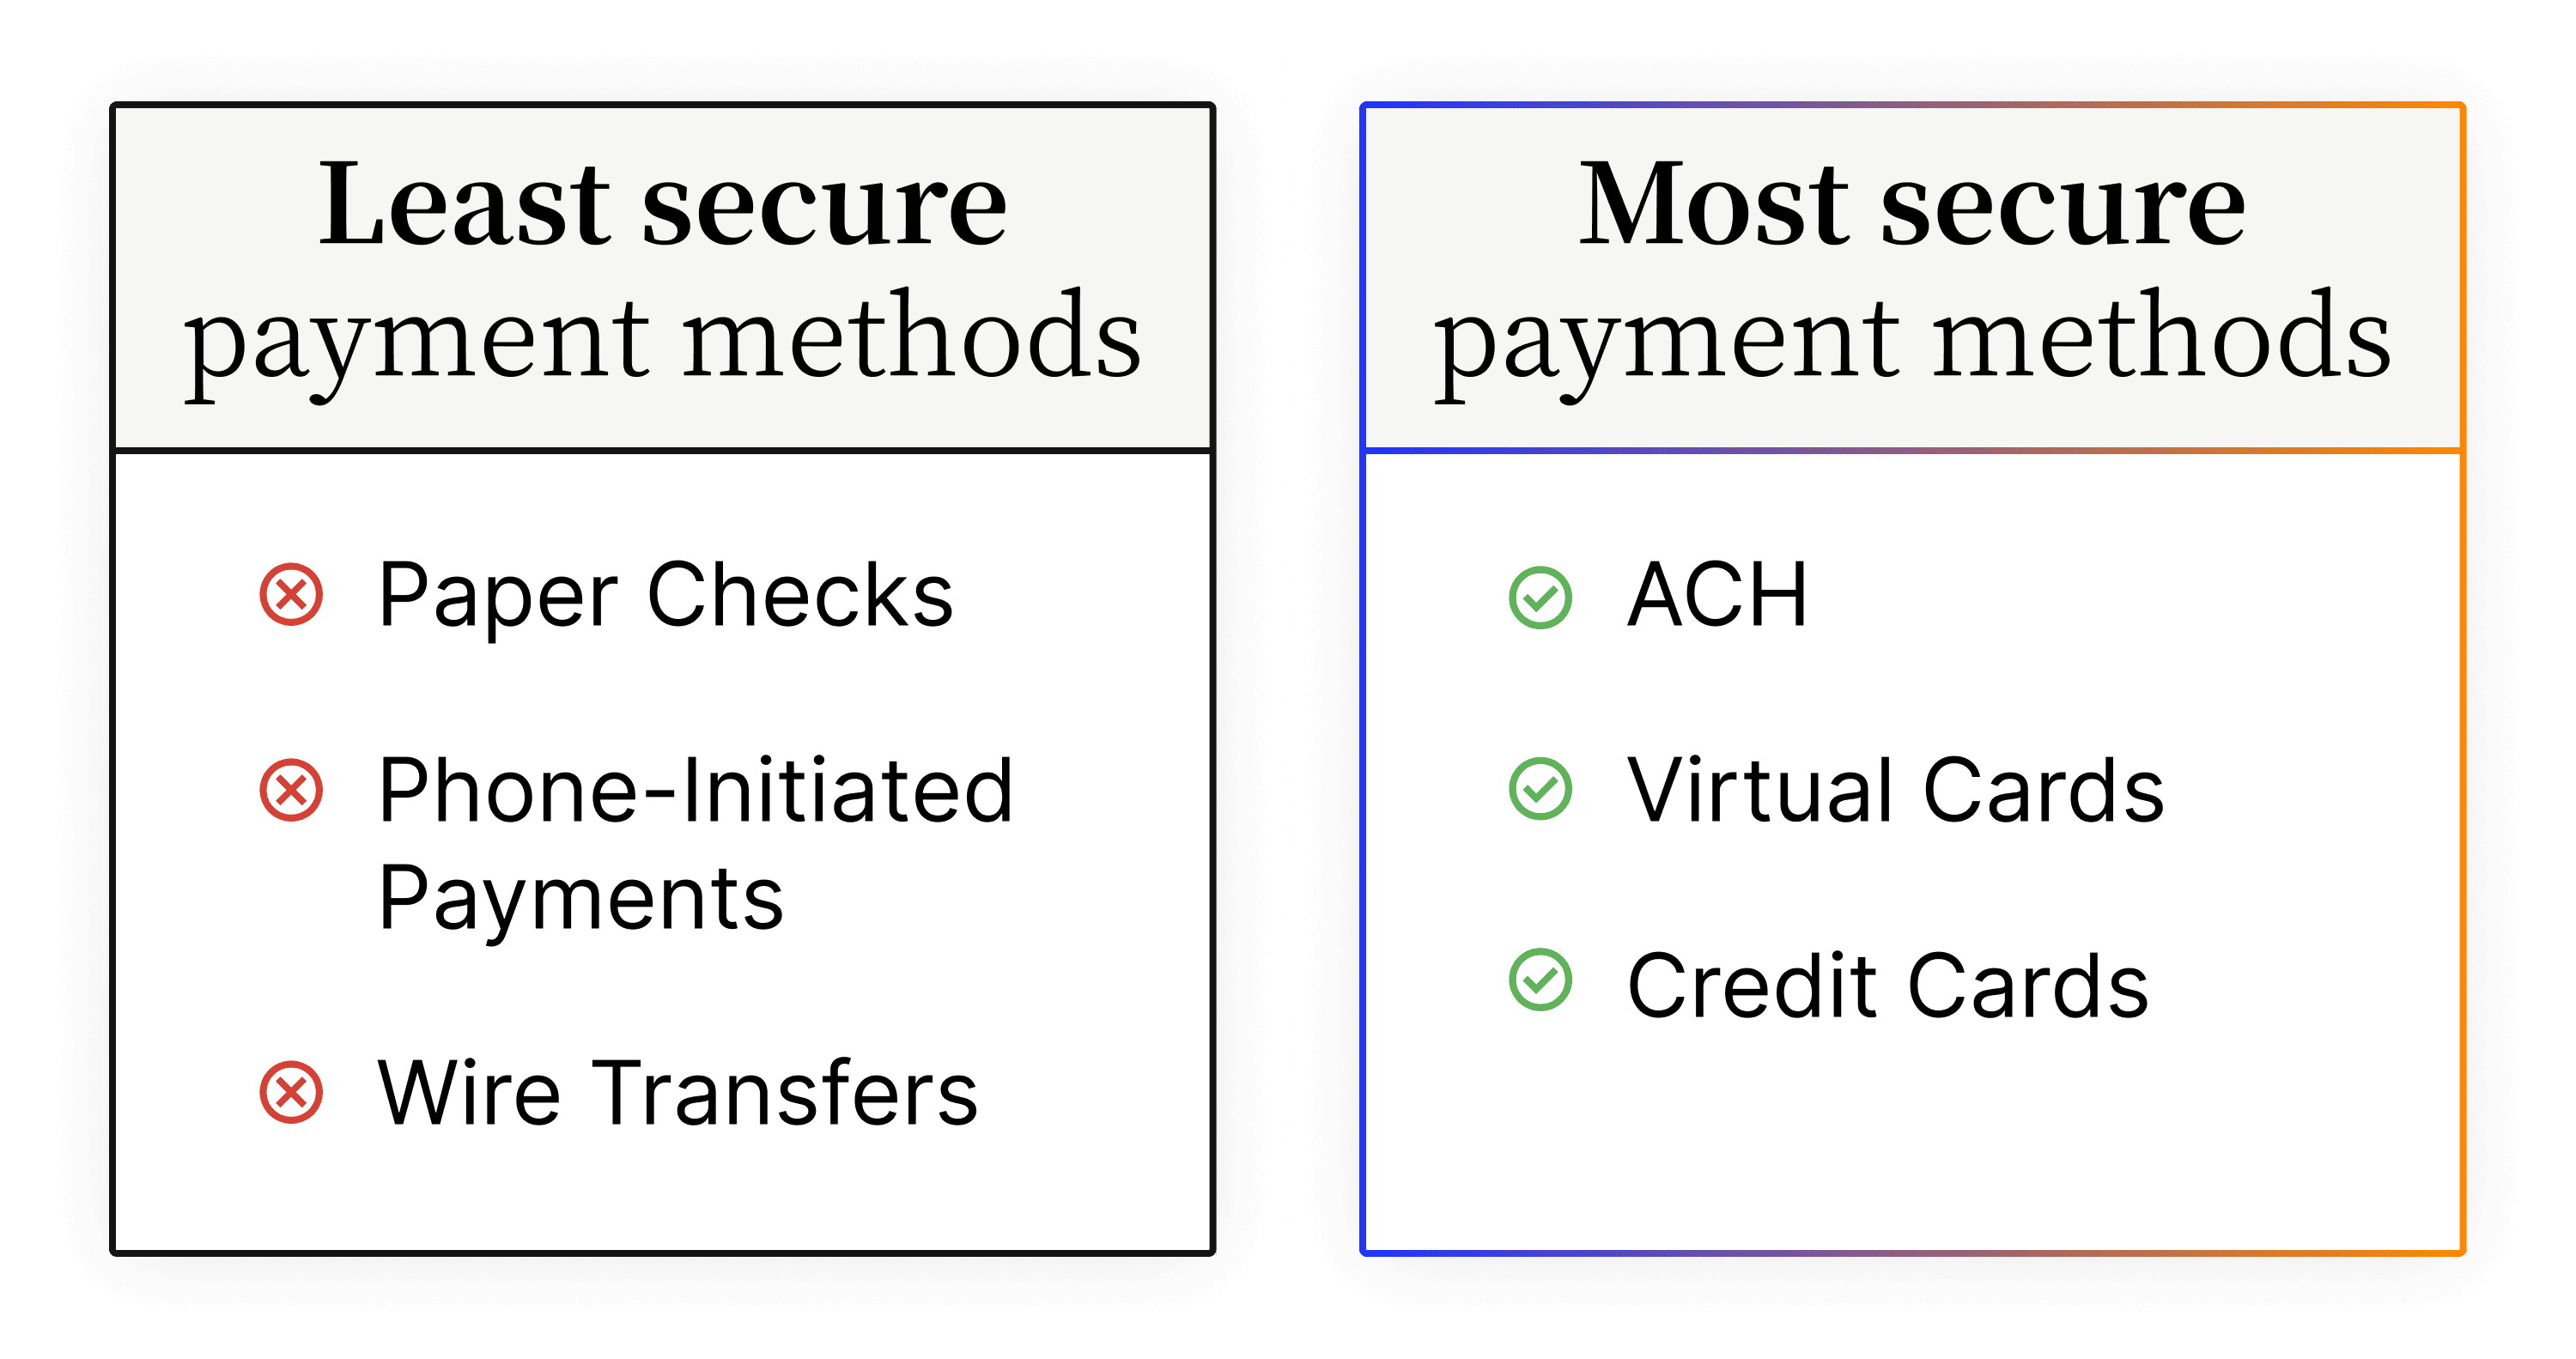 The most and least secure payment methods